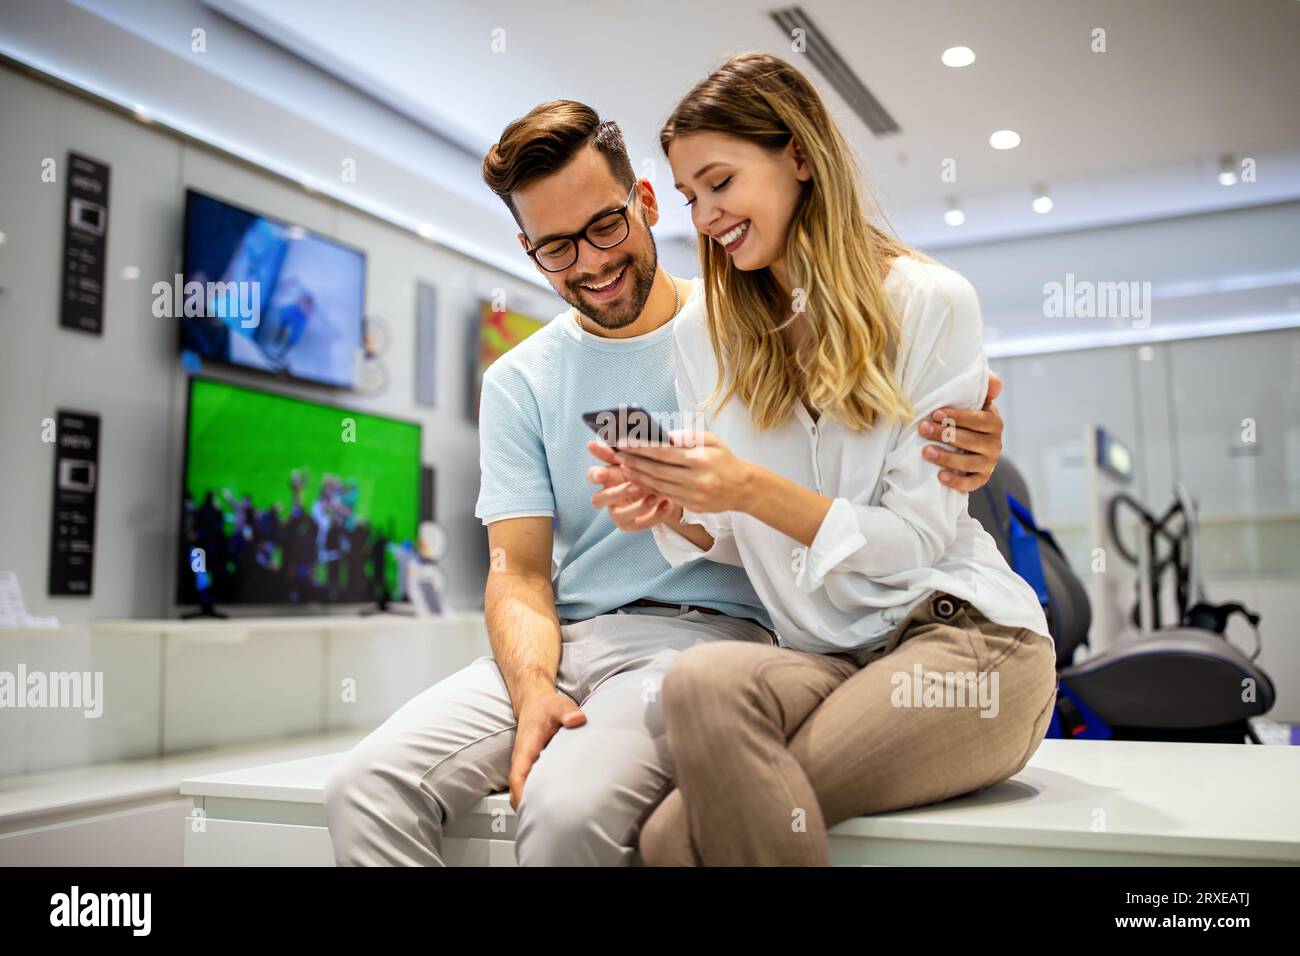 Smiling young couple looking at smartphone. Multiethnic people sharing social media on cell phone. Stock Photo